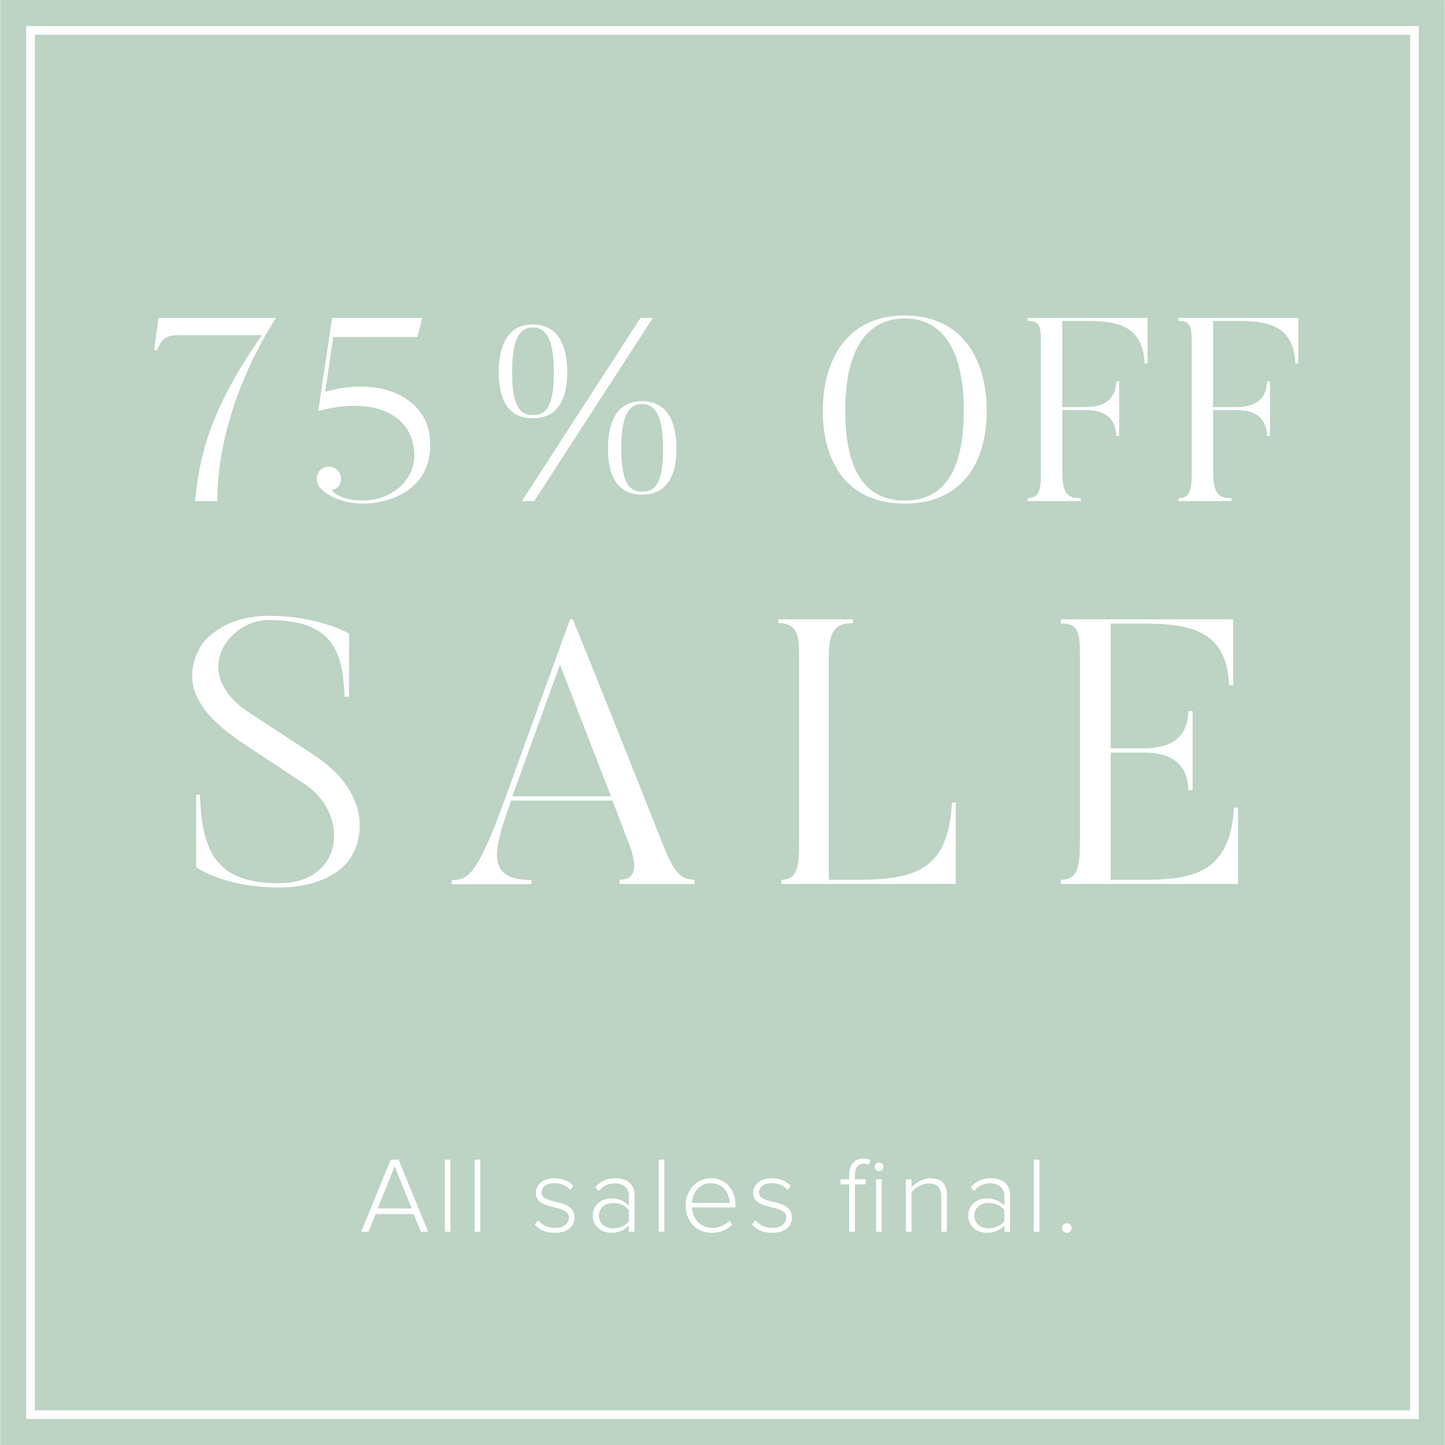 Sale 75% Off! All Sales Final